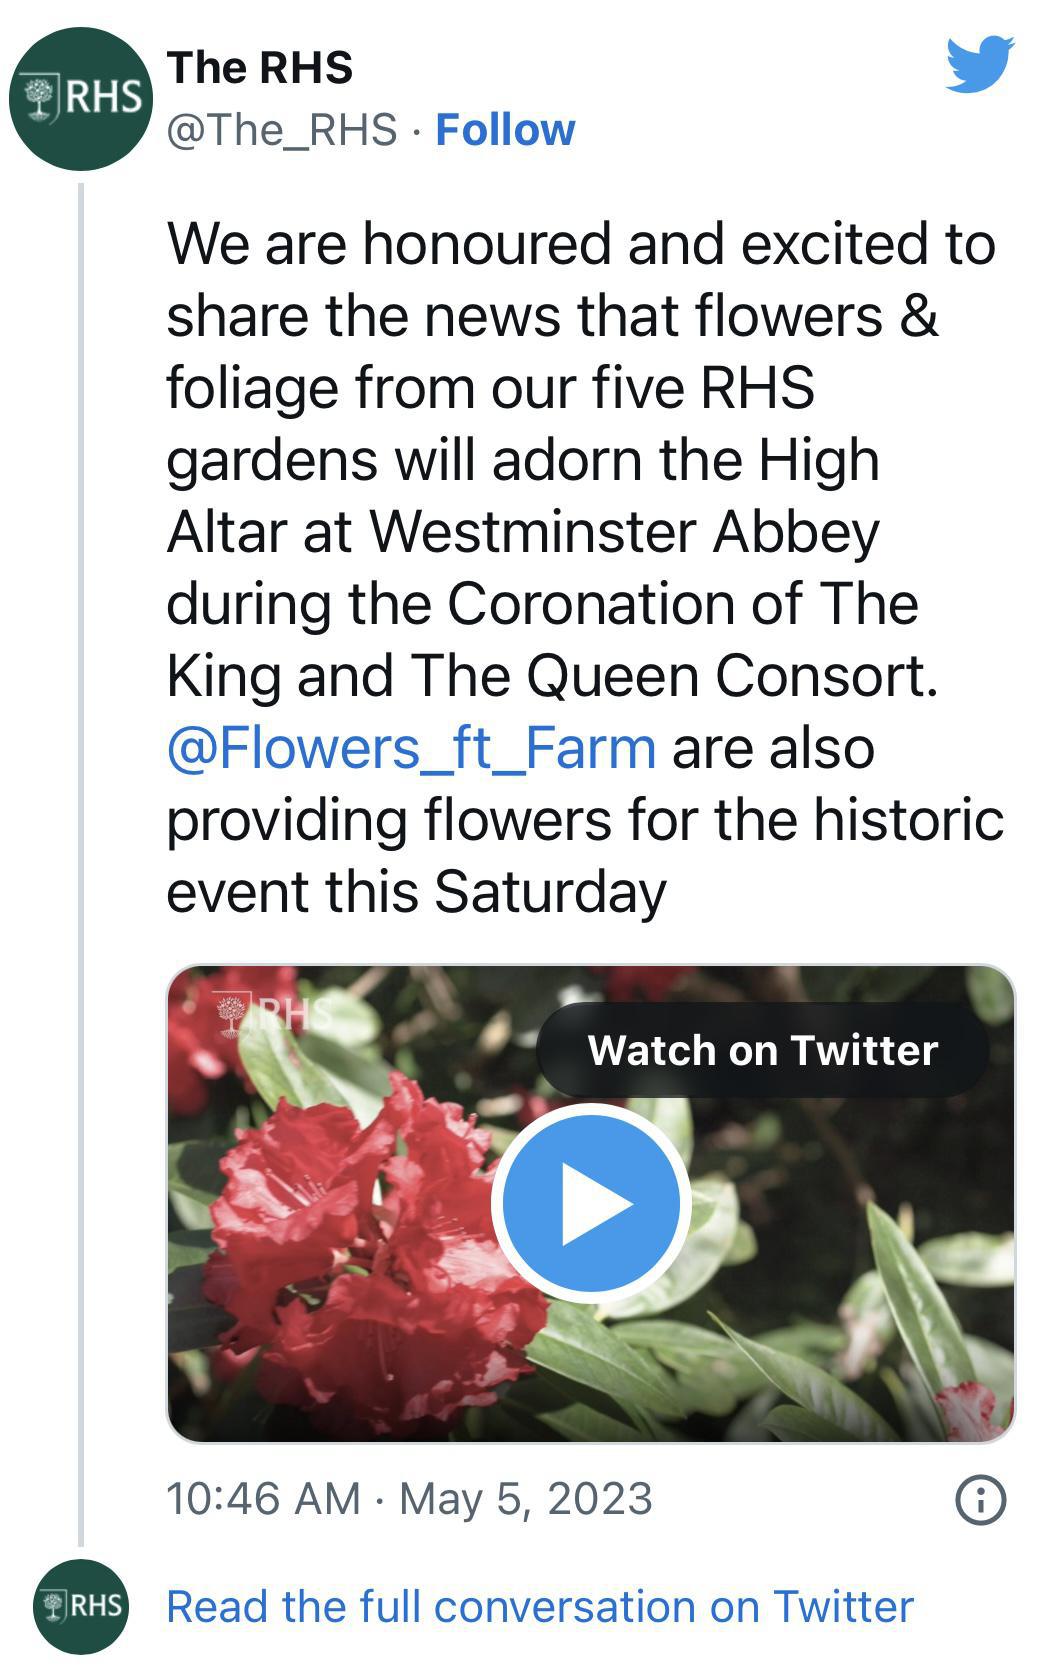 Flowers at the Coronation Service of The King and The Queen Consort